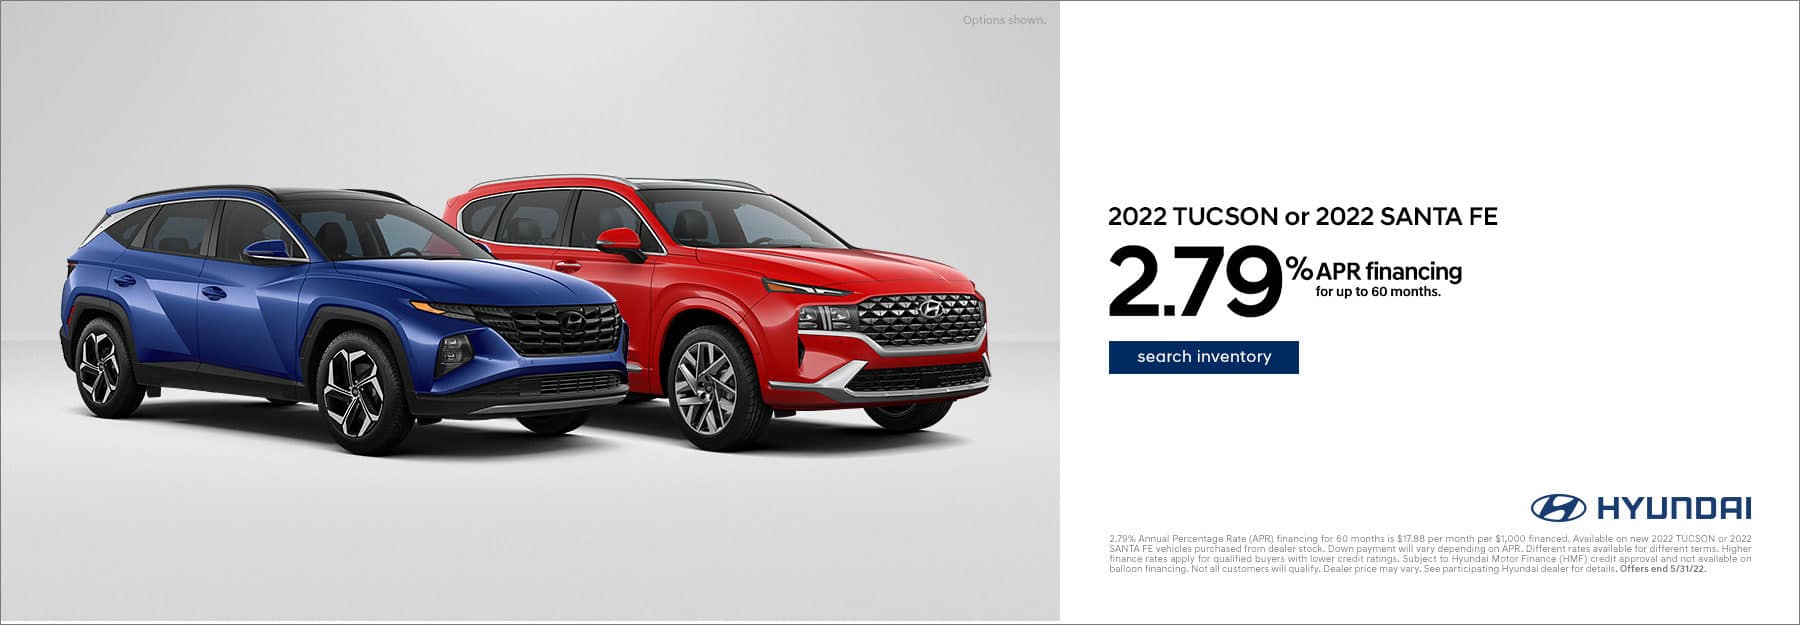 2.79% for 60 mo on 2022 Tucson and Santa Fe